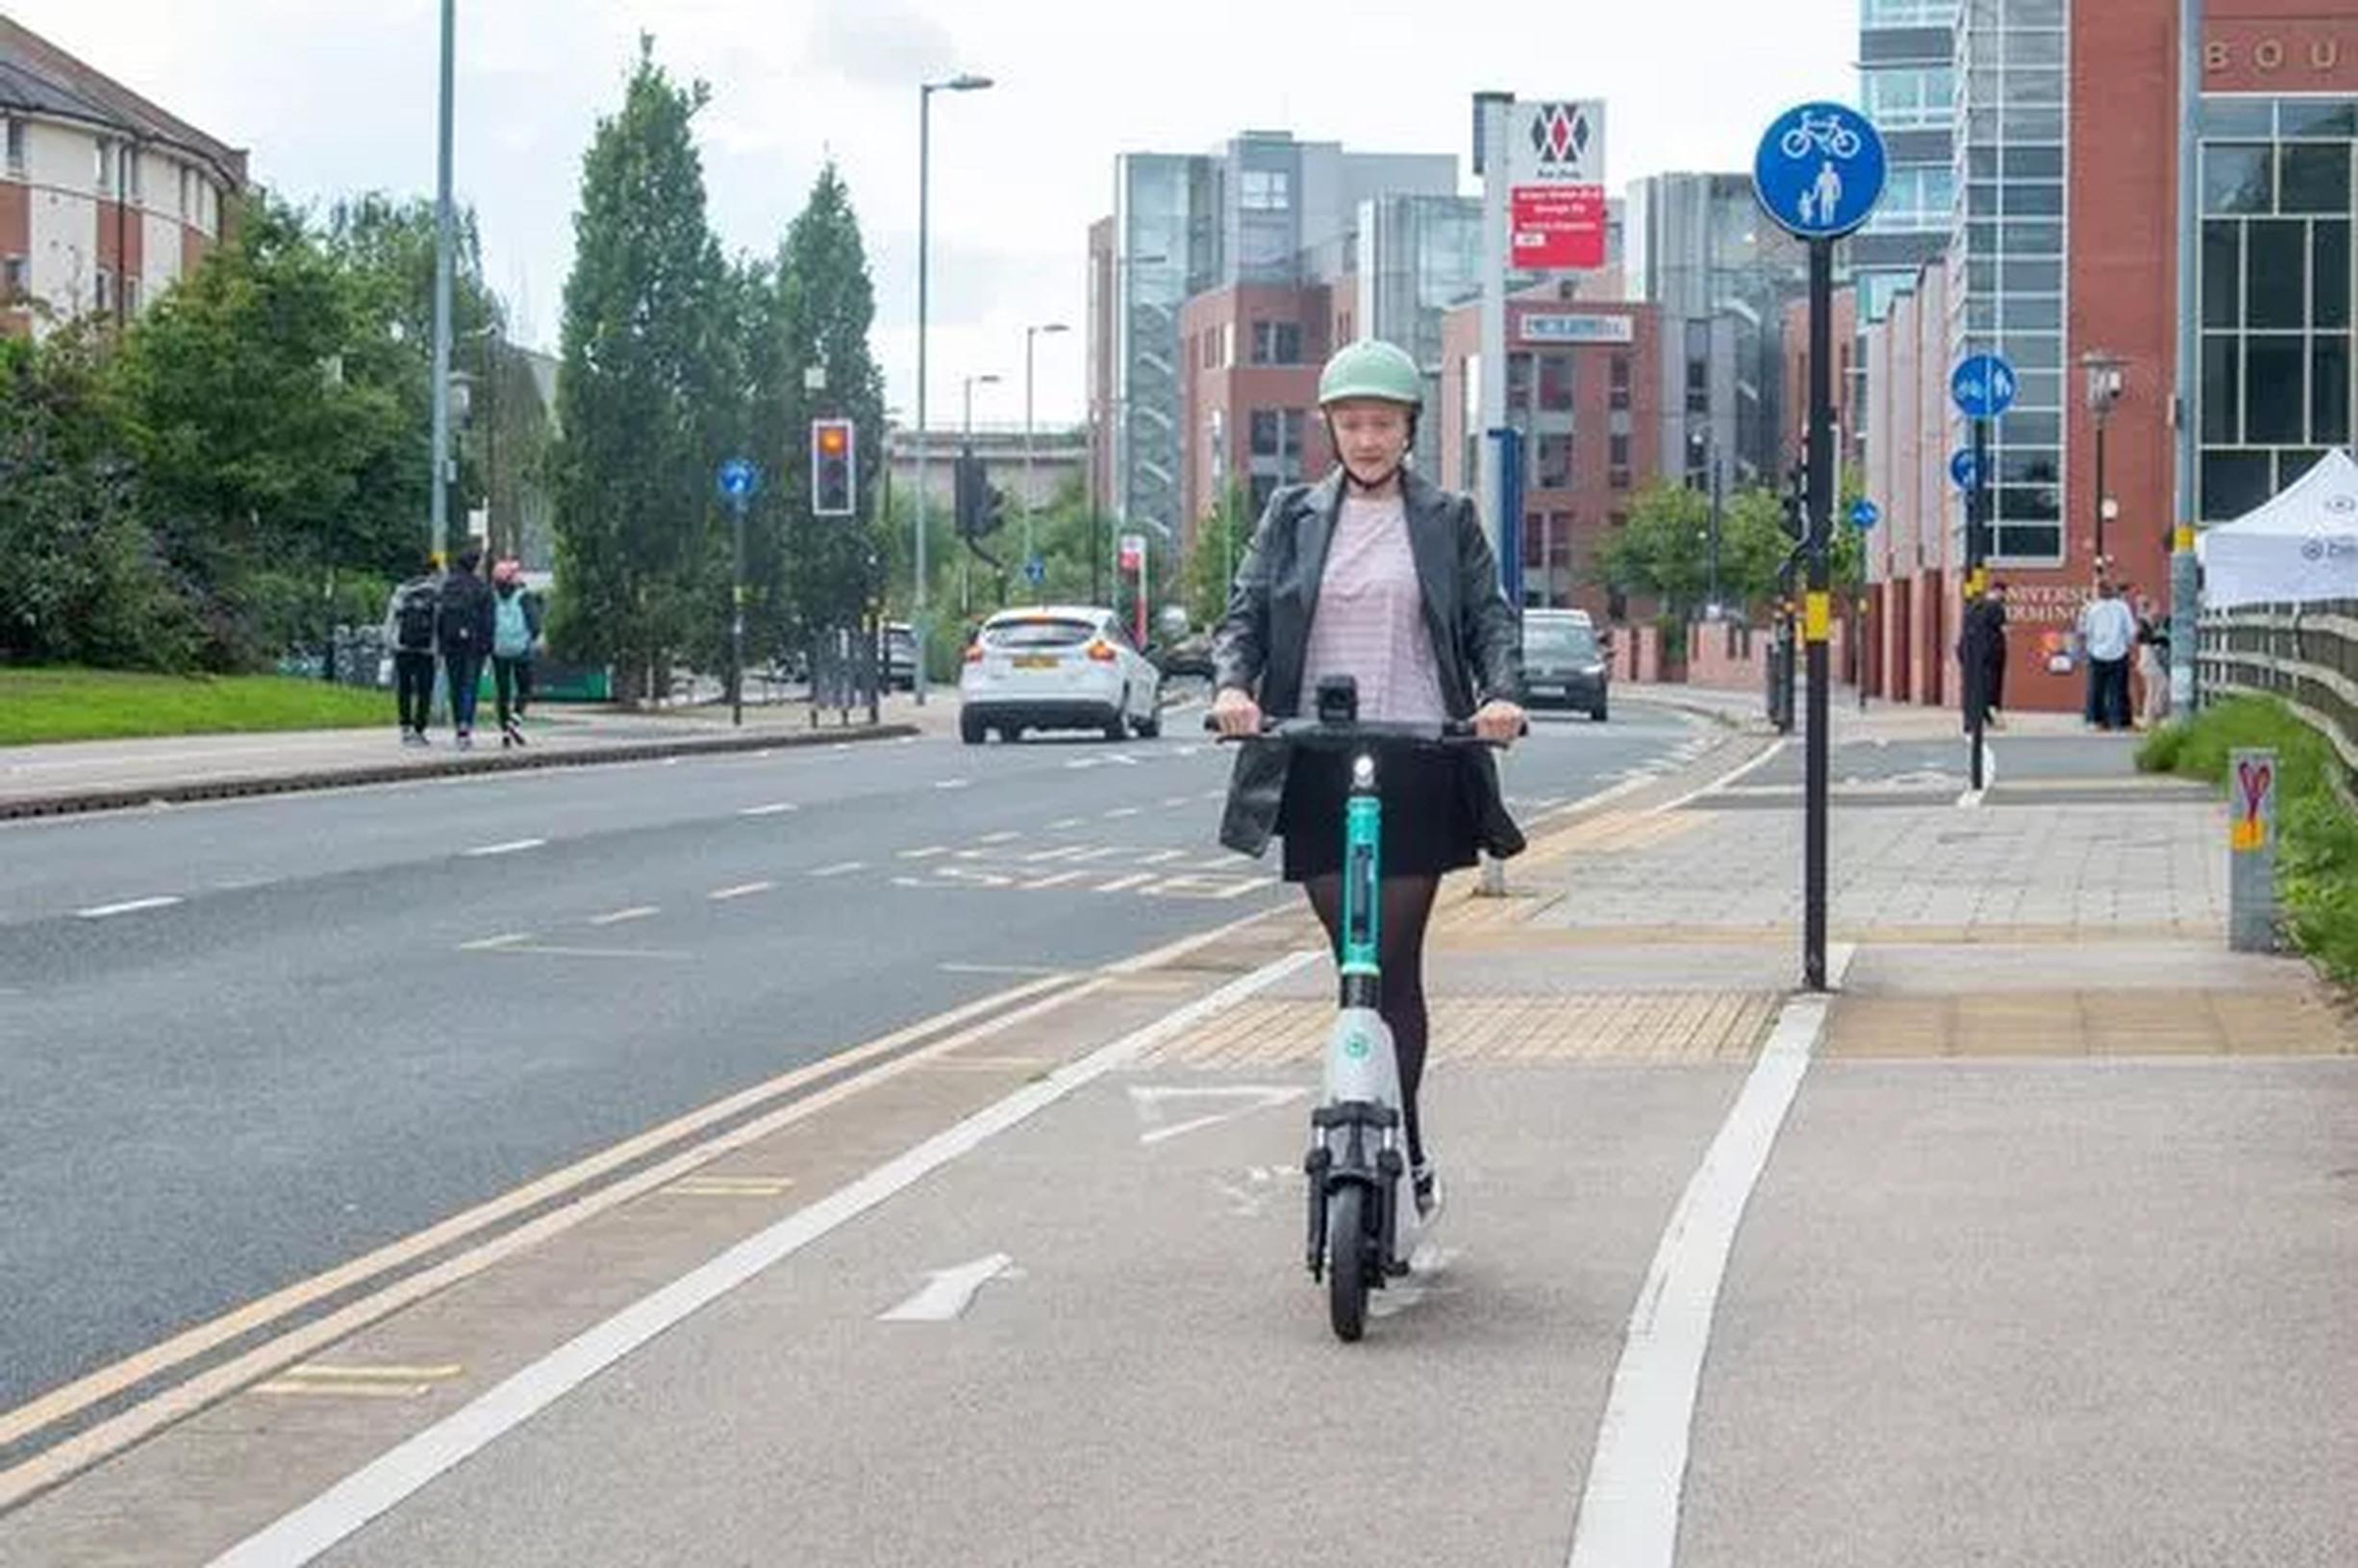 A fleet of 700 Beryl e-scooters is due to be available in Birmingham from late September